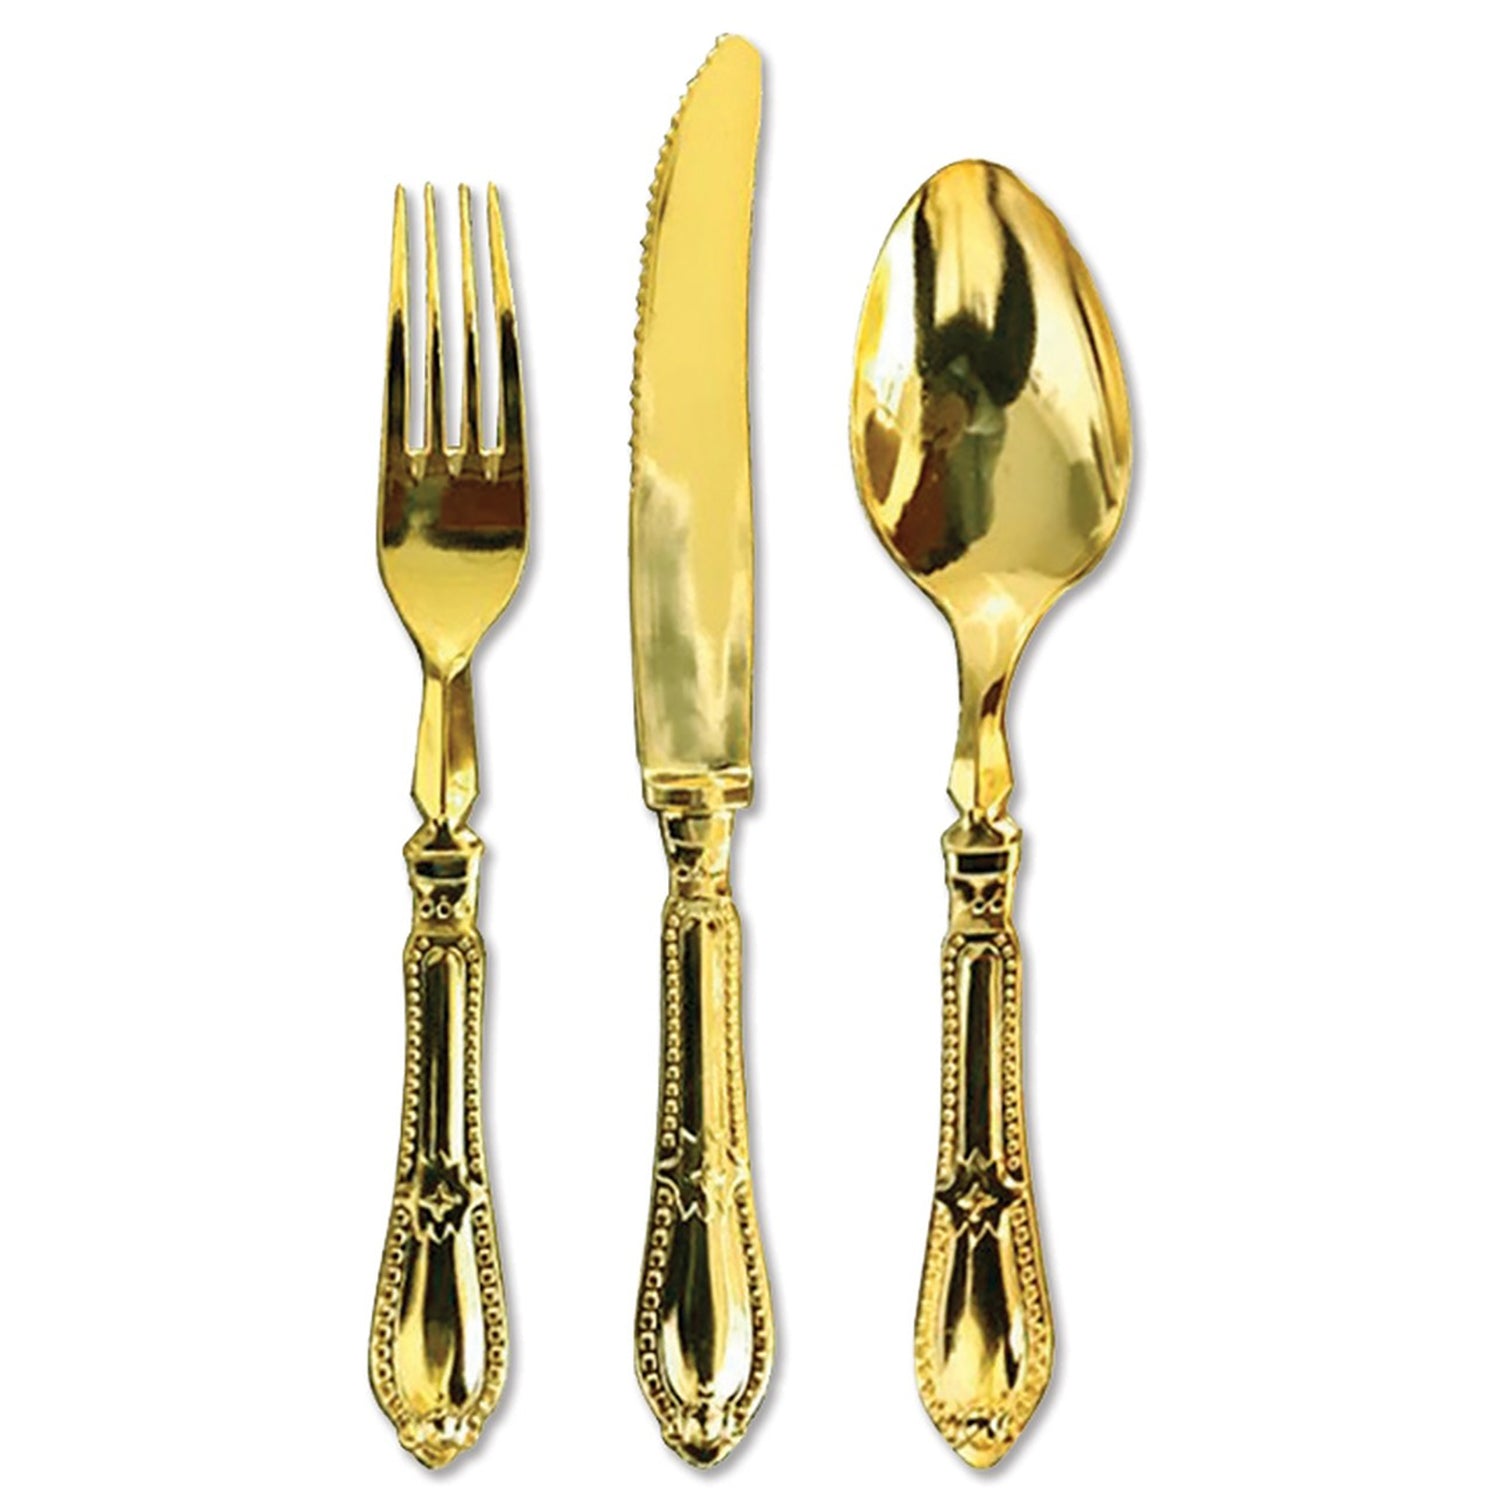 SALE Luxury Baroque Collection Gold Tee Spoons 12 count Tablesettings Decorline   